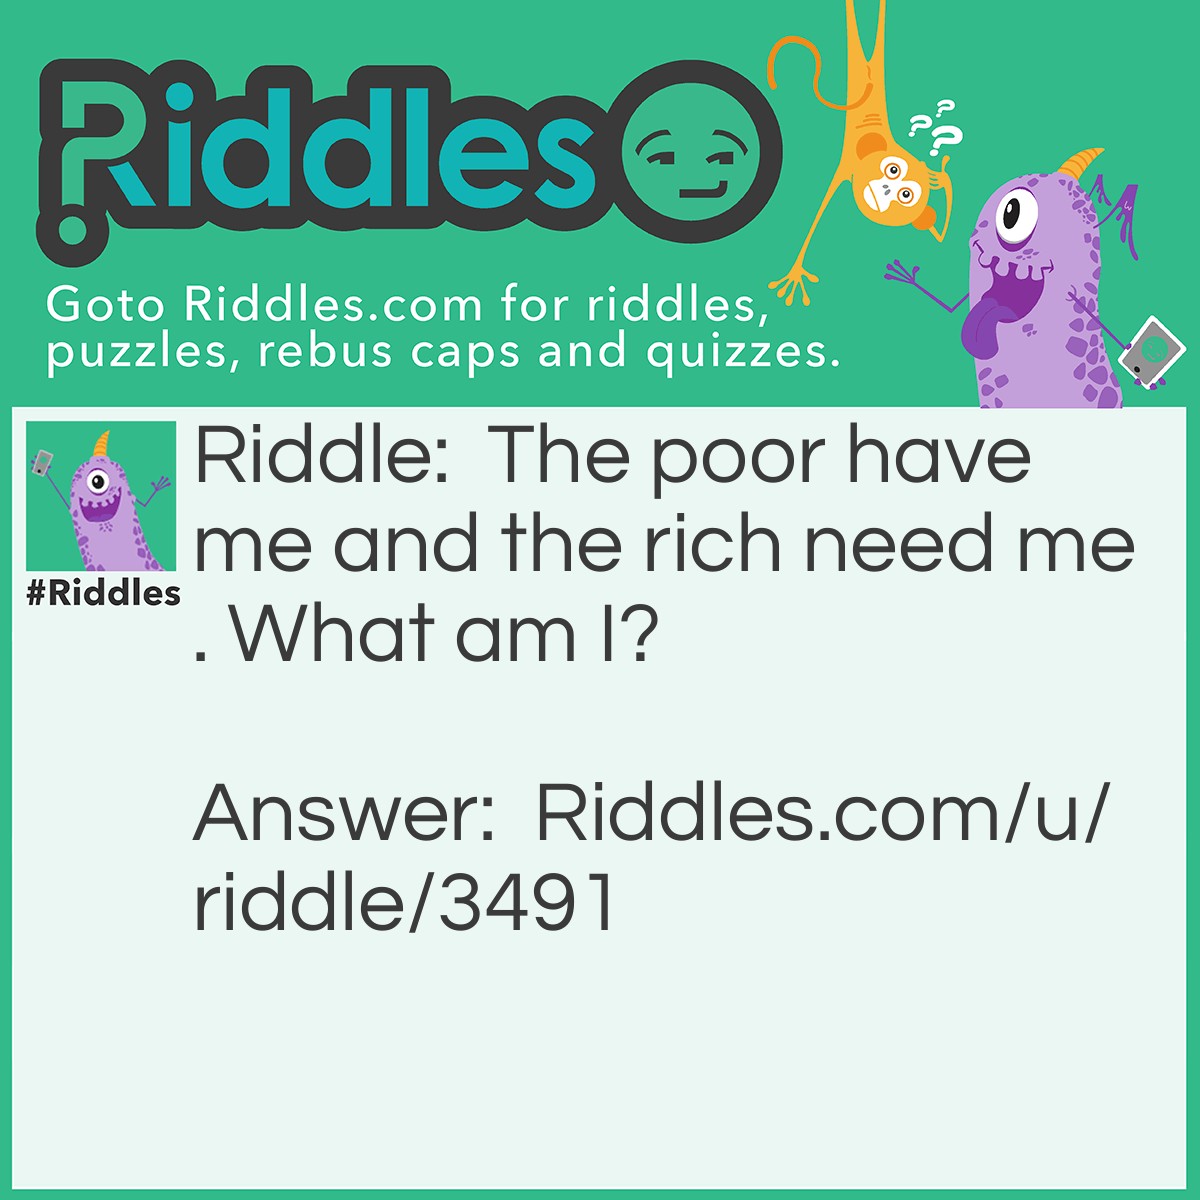 Riddle: The poor have me and the rich need me. What am I? Answer: Nothing.